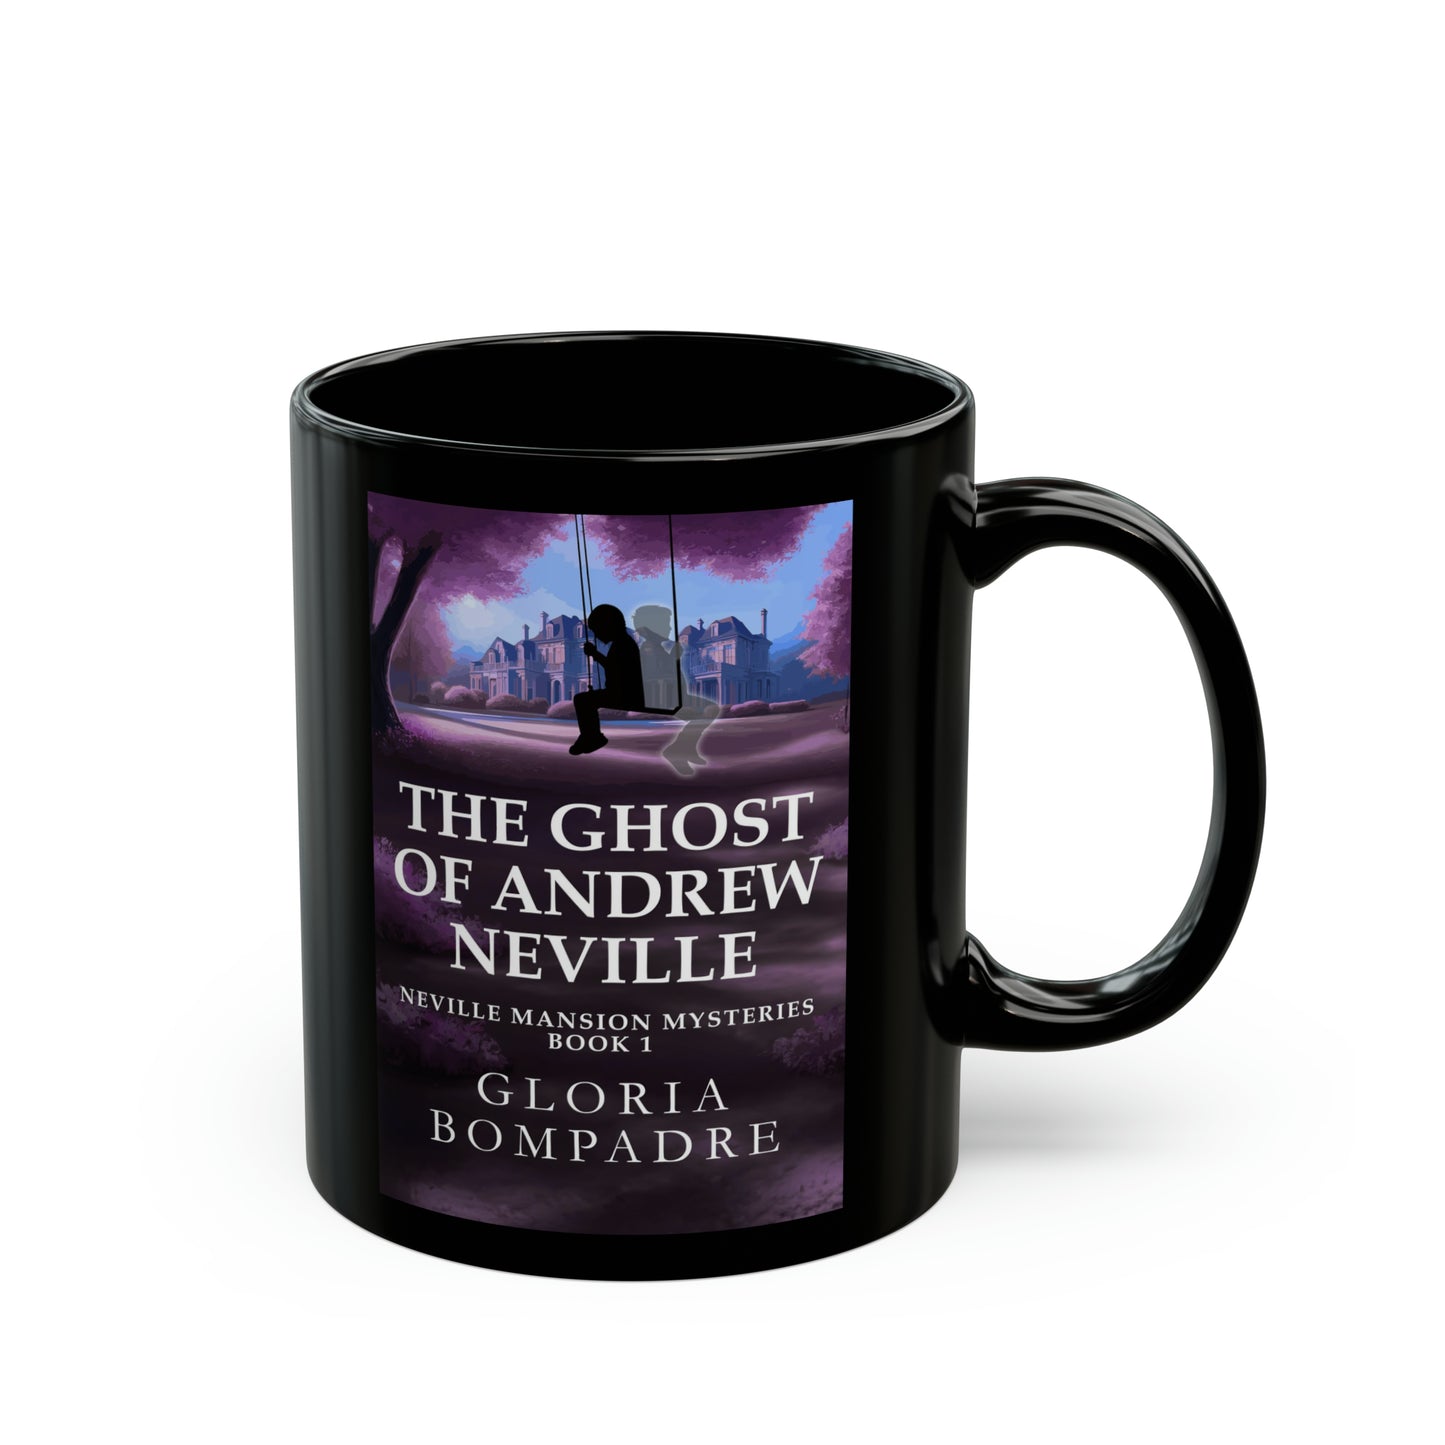 The Ghost of Andrew Neville - Black Coffee Mug